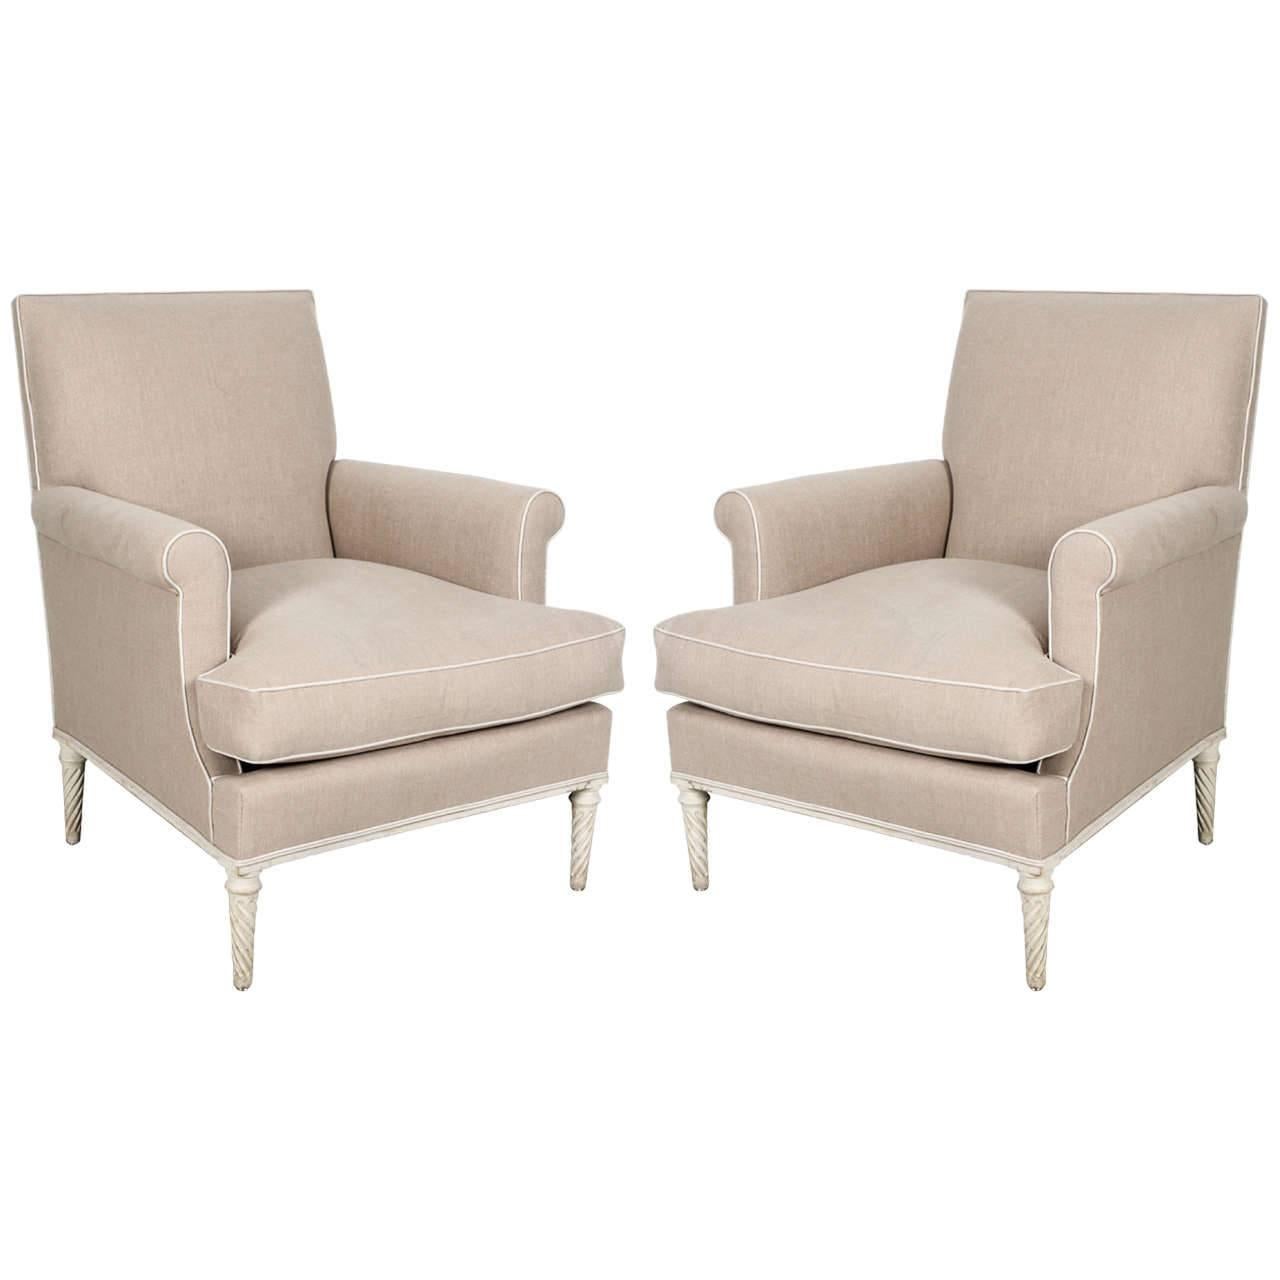 Pair of Armchairs by Maison Carlhian For Sale